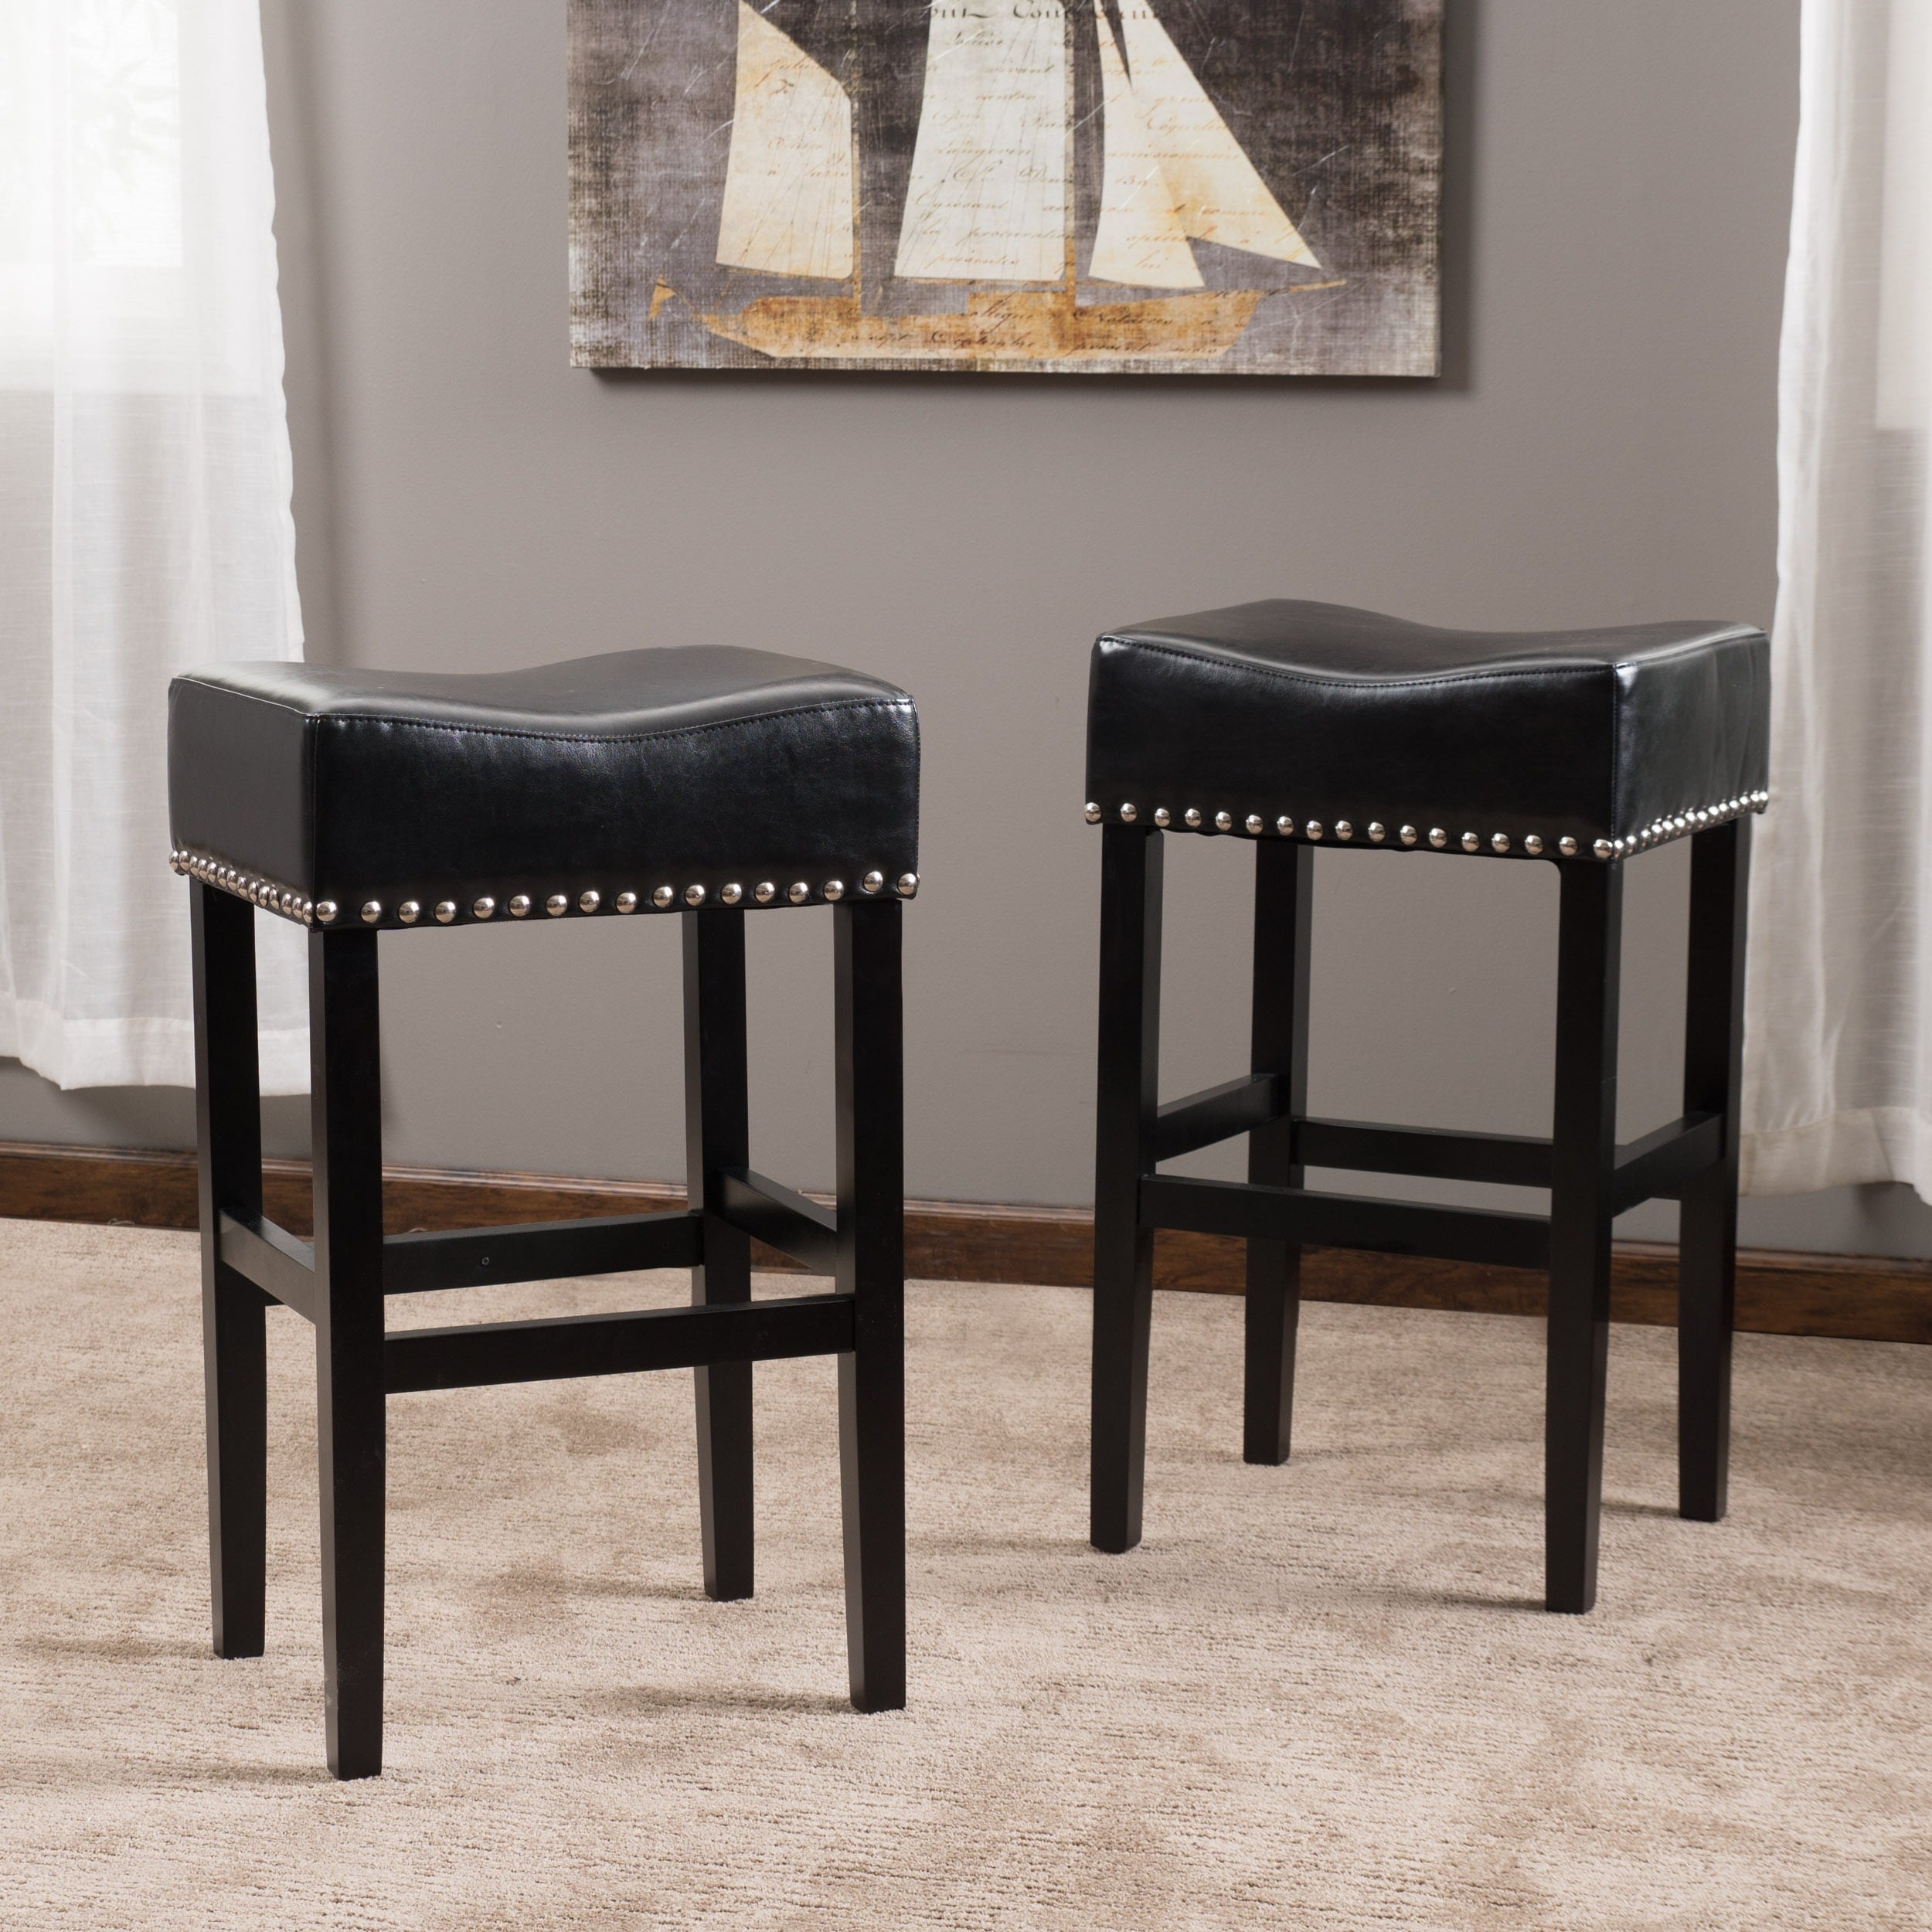 http://ak1.ostkcdn.com/images/products/8661881/Christopher-Knight-Home-Lisette-Backless-Leather-Bar-Stool-Set-of-2-L15920464.jpg